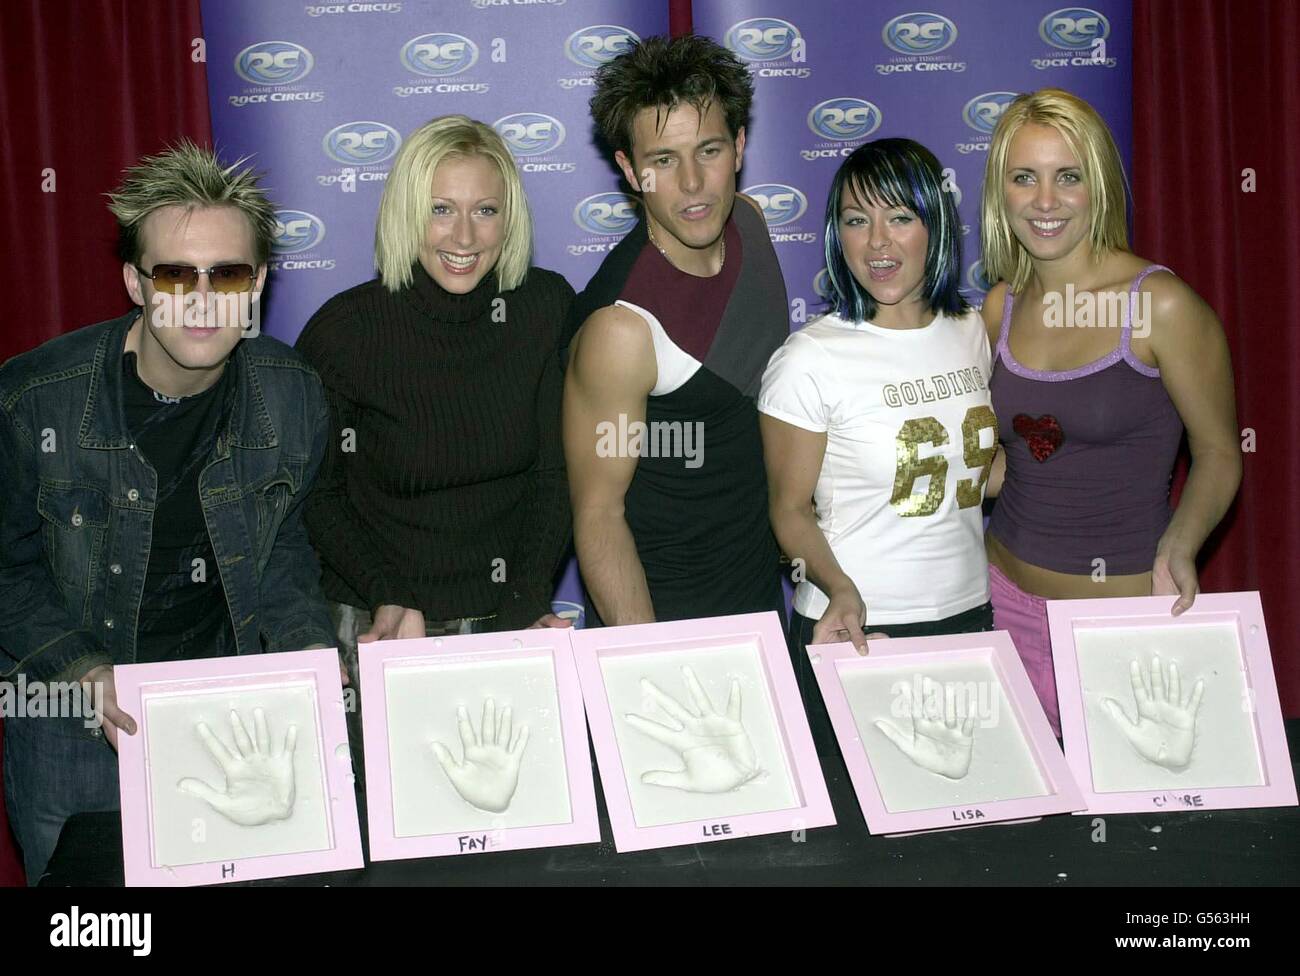 Pop group 'Steps' make a big impression at the Rock circus in Piccadilly, where they were making plaster casts of their hands for the waxworks display. * The group (left to right) 'H', Fay, Lee, Lisa and Claire were at the Madame Tussauds attraction to leave their mark. Stock Photo